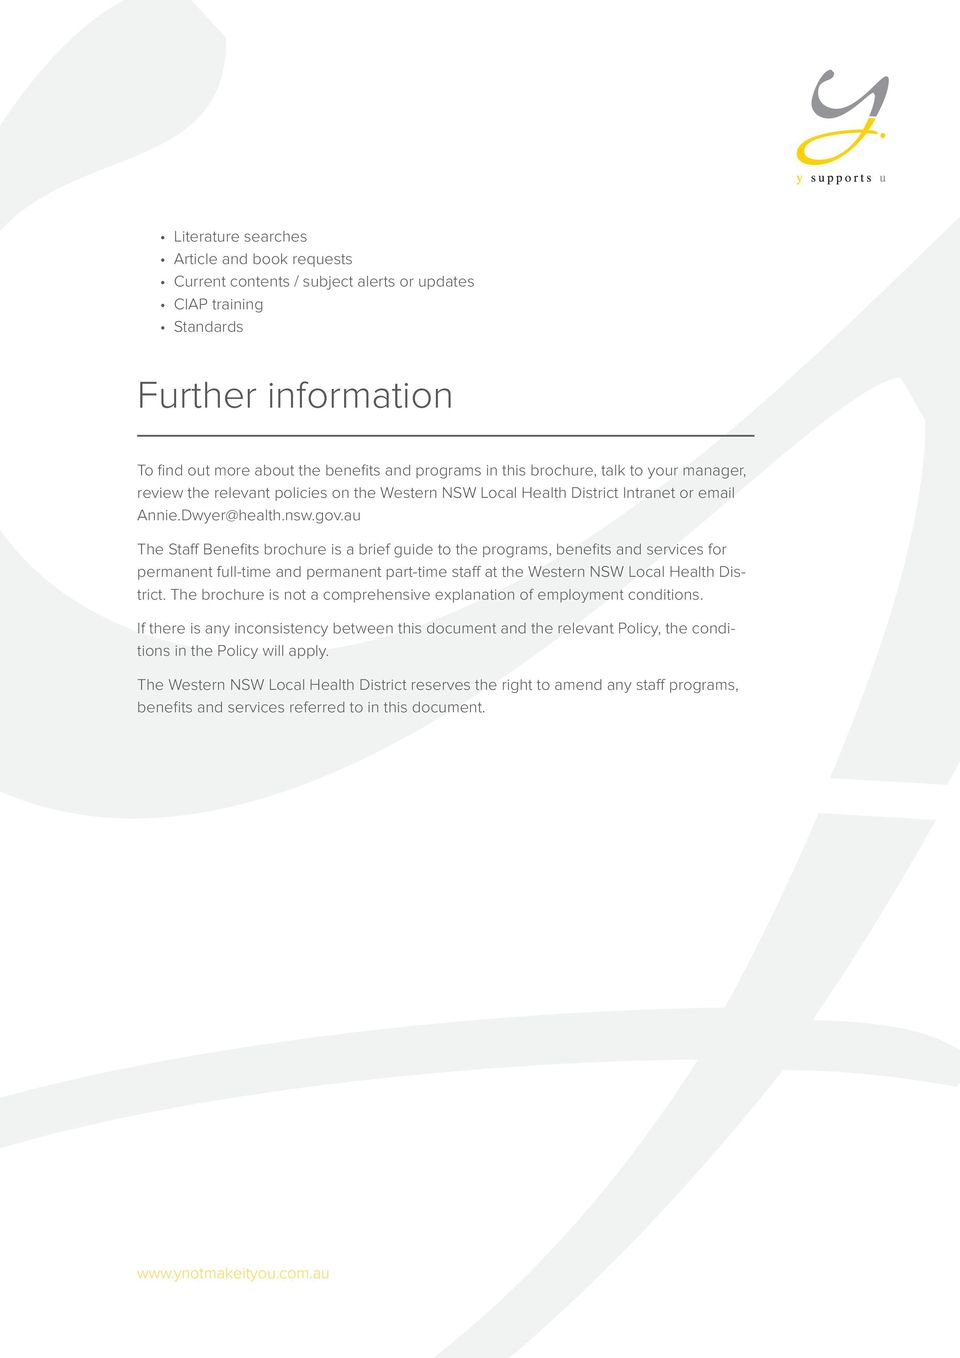 au The Staff Benefits brochure is a brief guide to the programs, benefits and services for permanent full-time and permanent part-time staff at the Western NSW Local Health District.